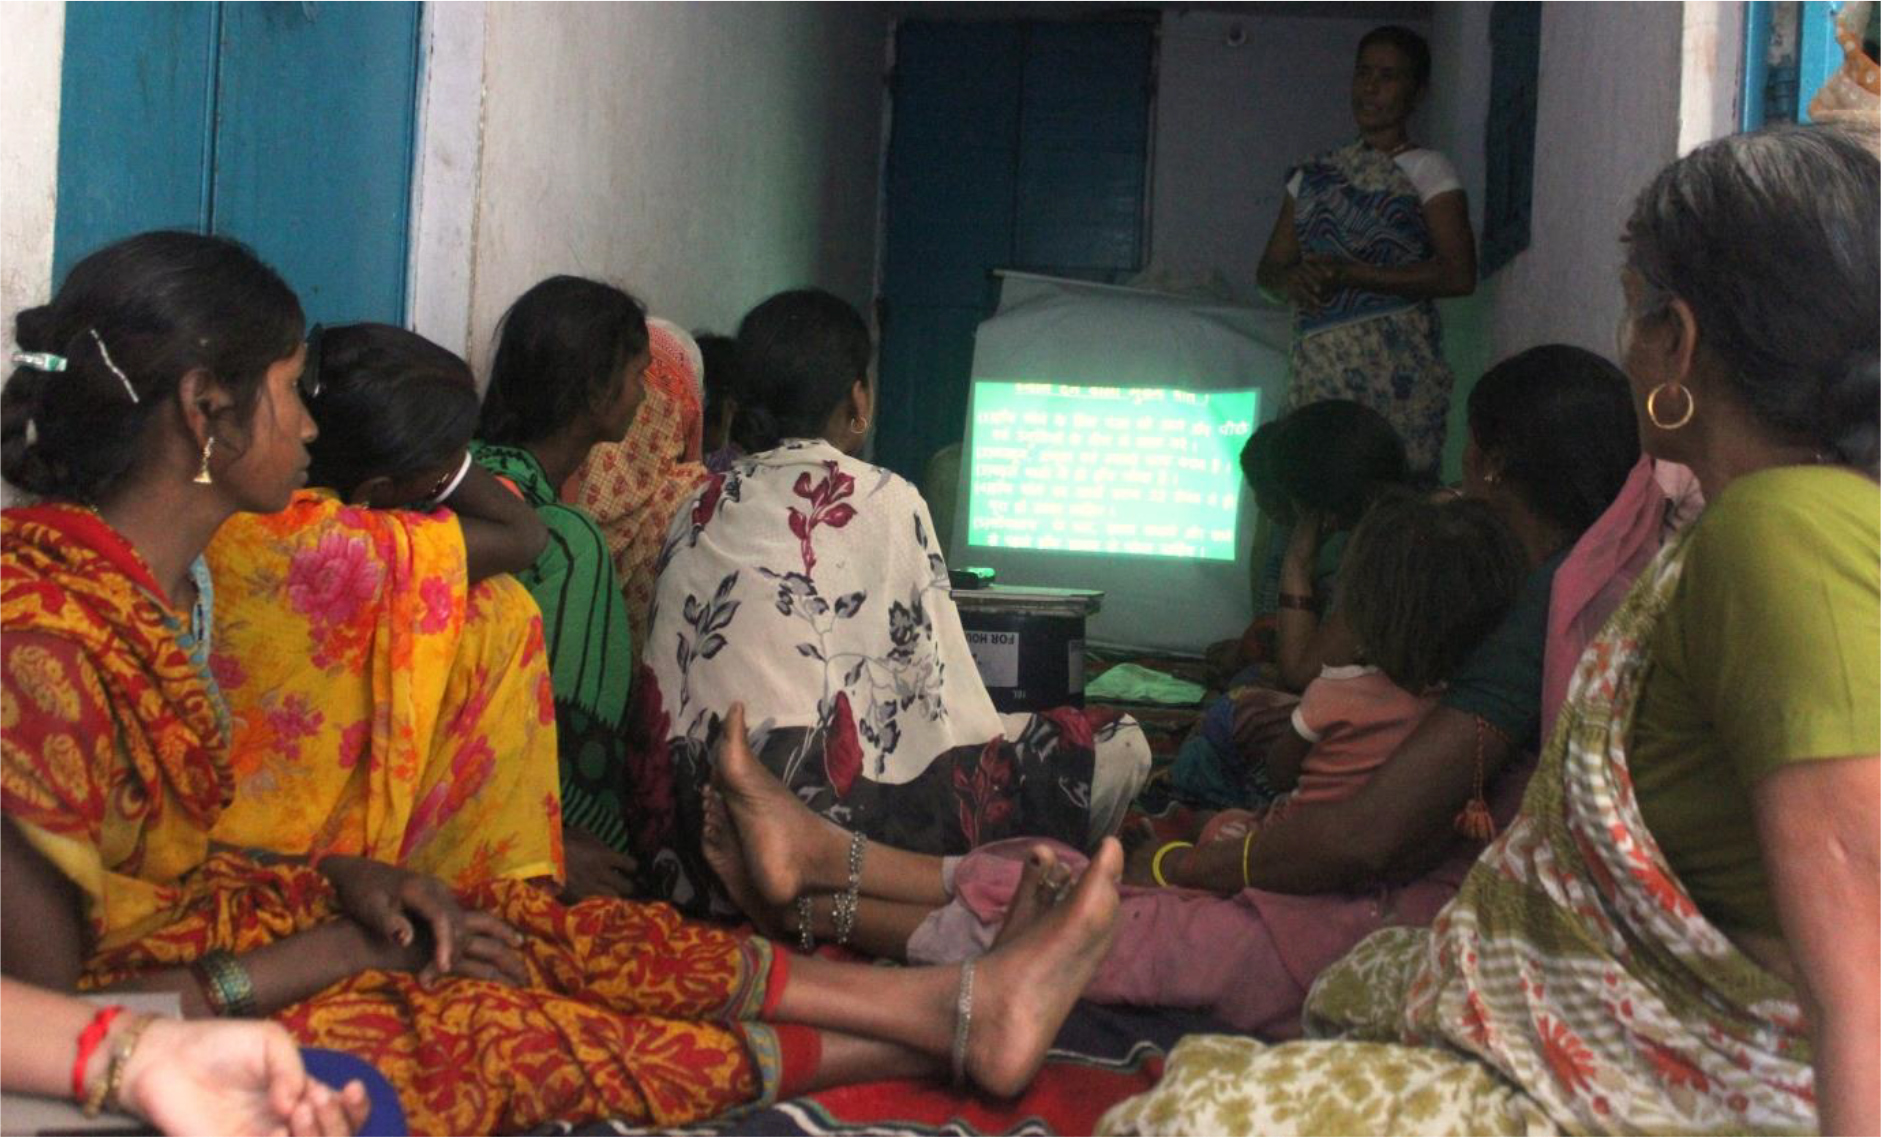 The image shows a group of village women seated on the floor attentively looking at the display from a projector.